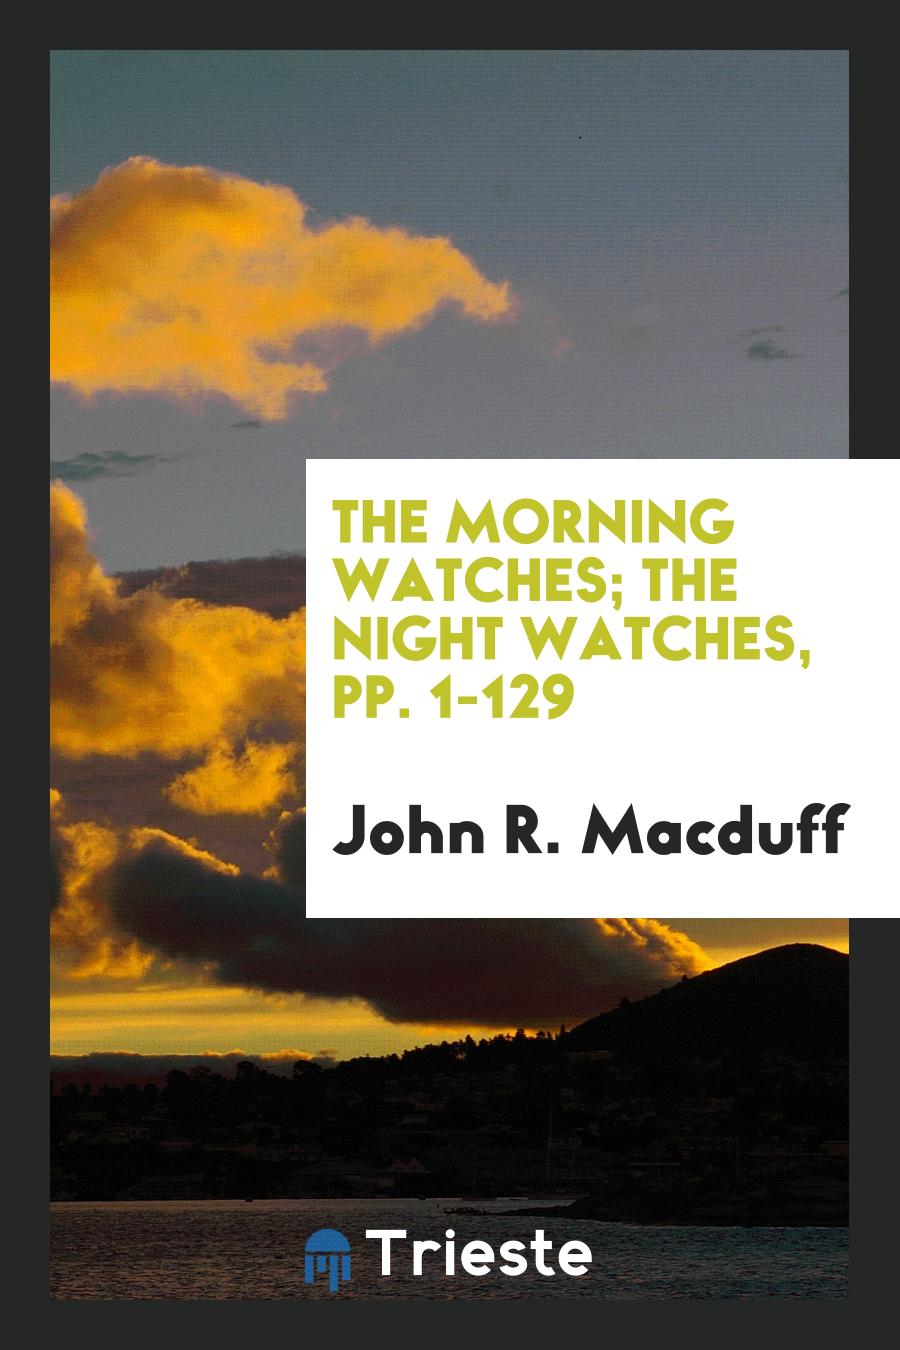 The Morning Watches; The Night Watches, pp. 1-129